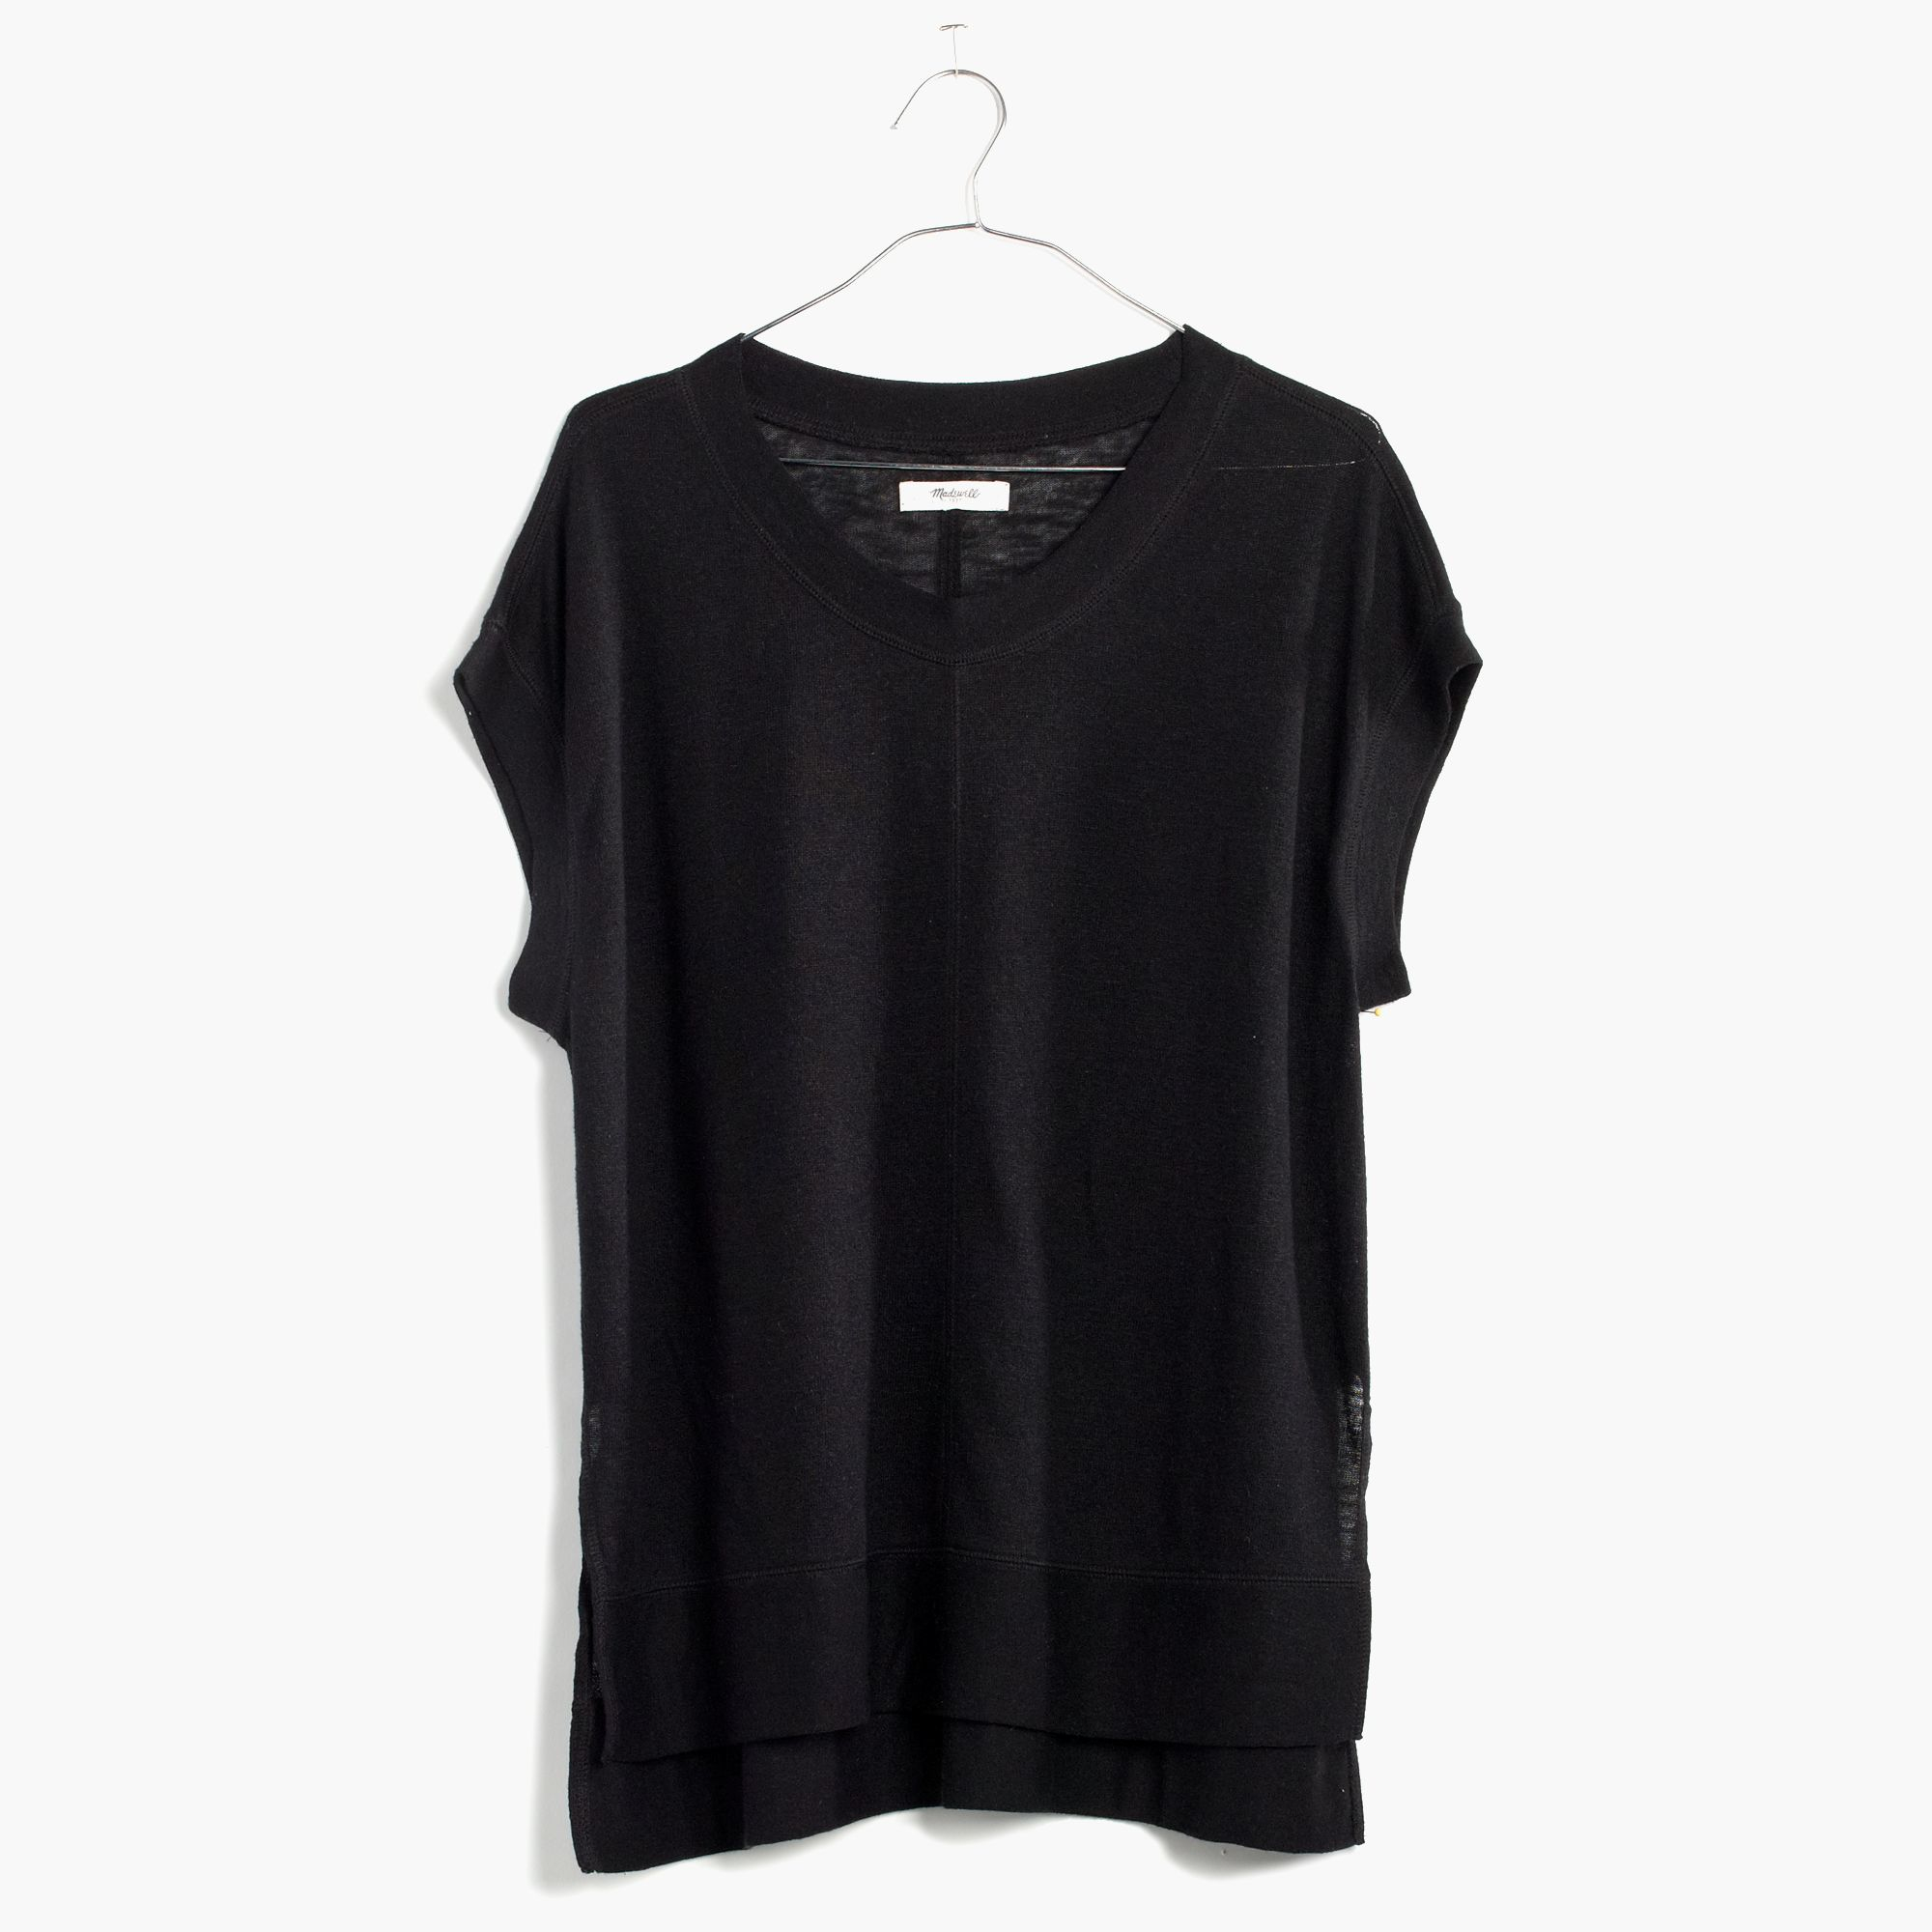 Madewell Linen Side-vent Tunic Tee in Black - Lyst